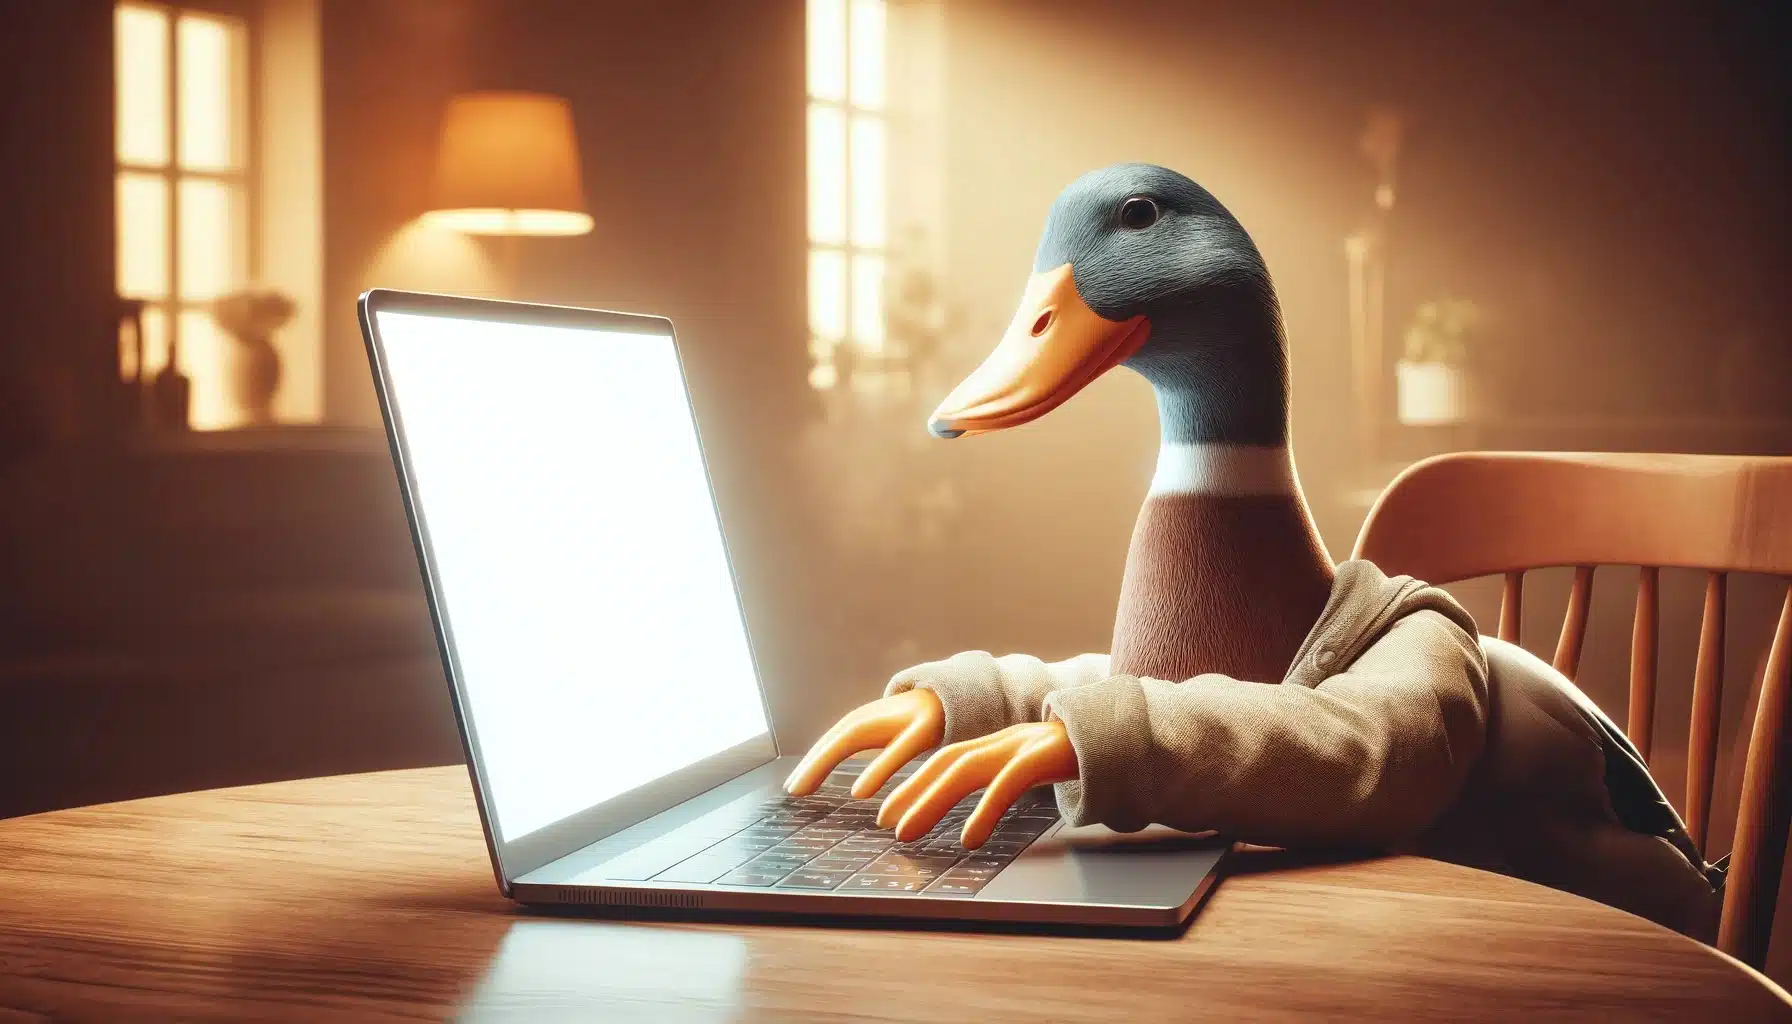 DuckDuckGo Introduces $9.99 Monthly Privacy Bundle with VPN